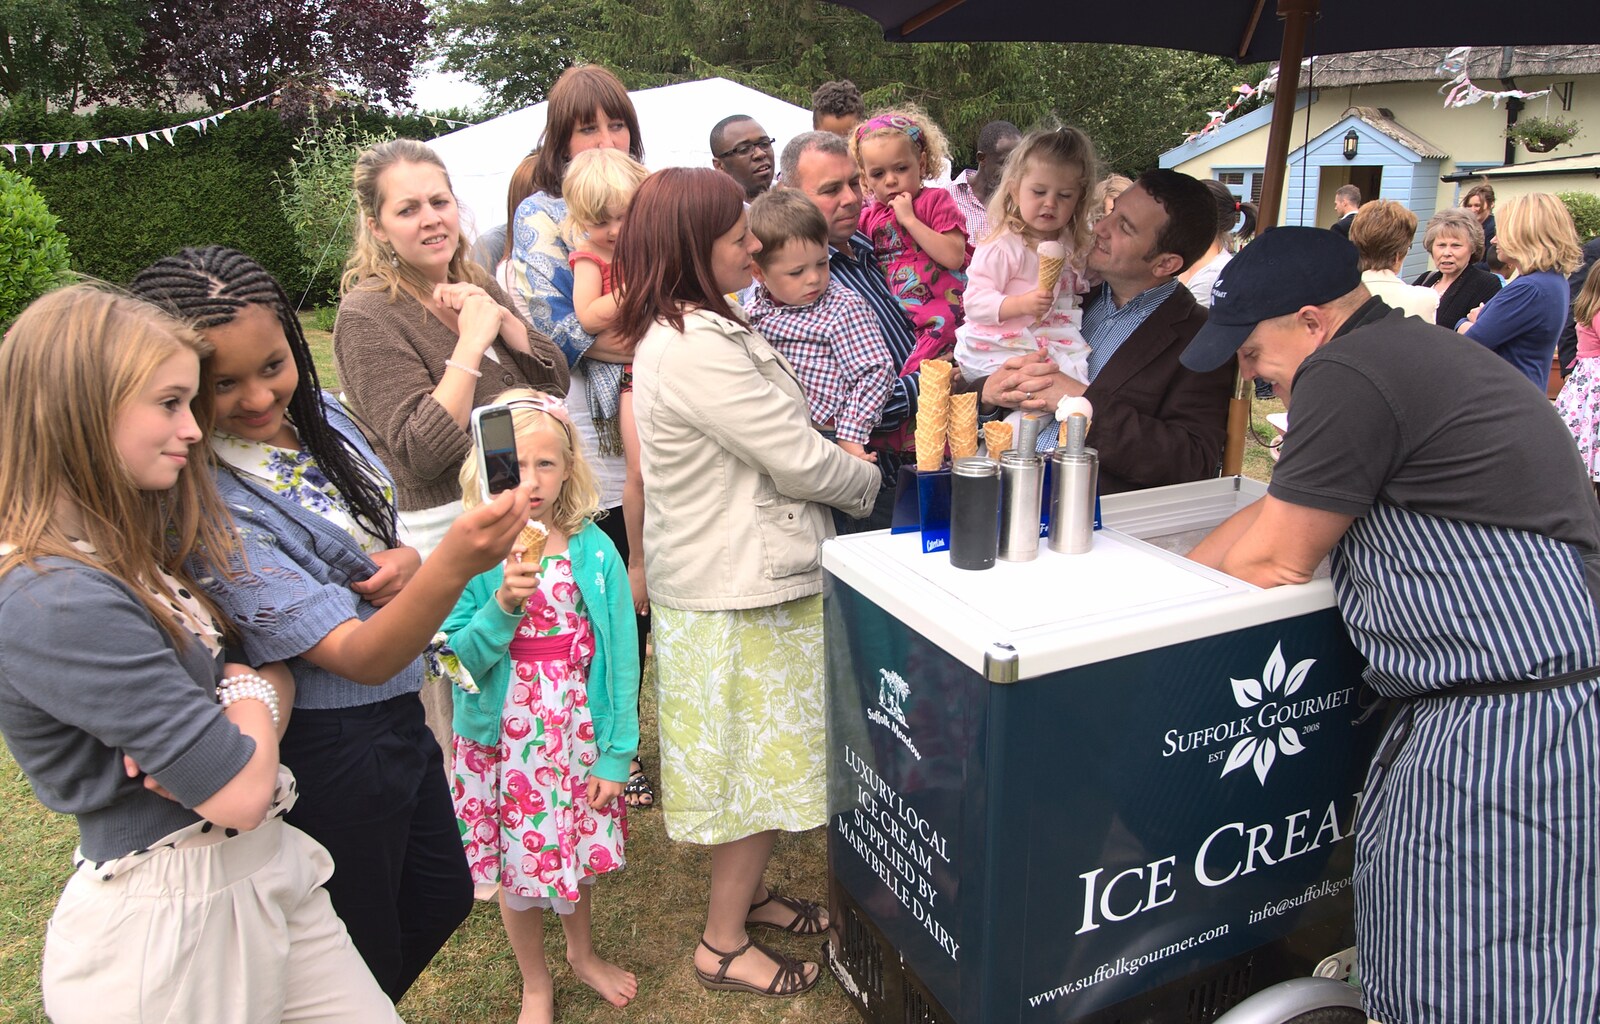 Everyone wants ice cream from A Christening at St. Mary's Church, Wortham, Suffolk - 12th June 2011